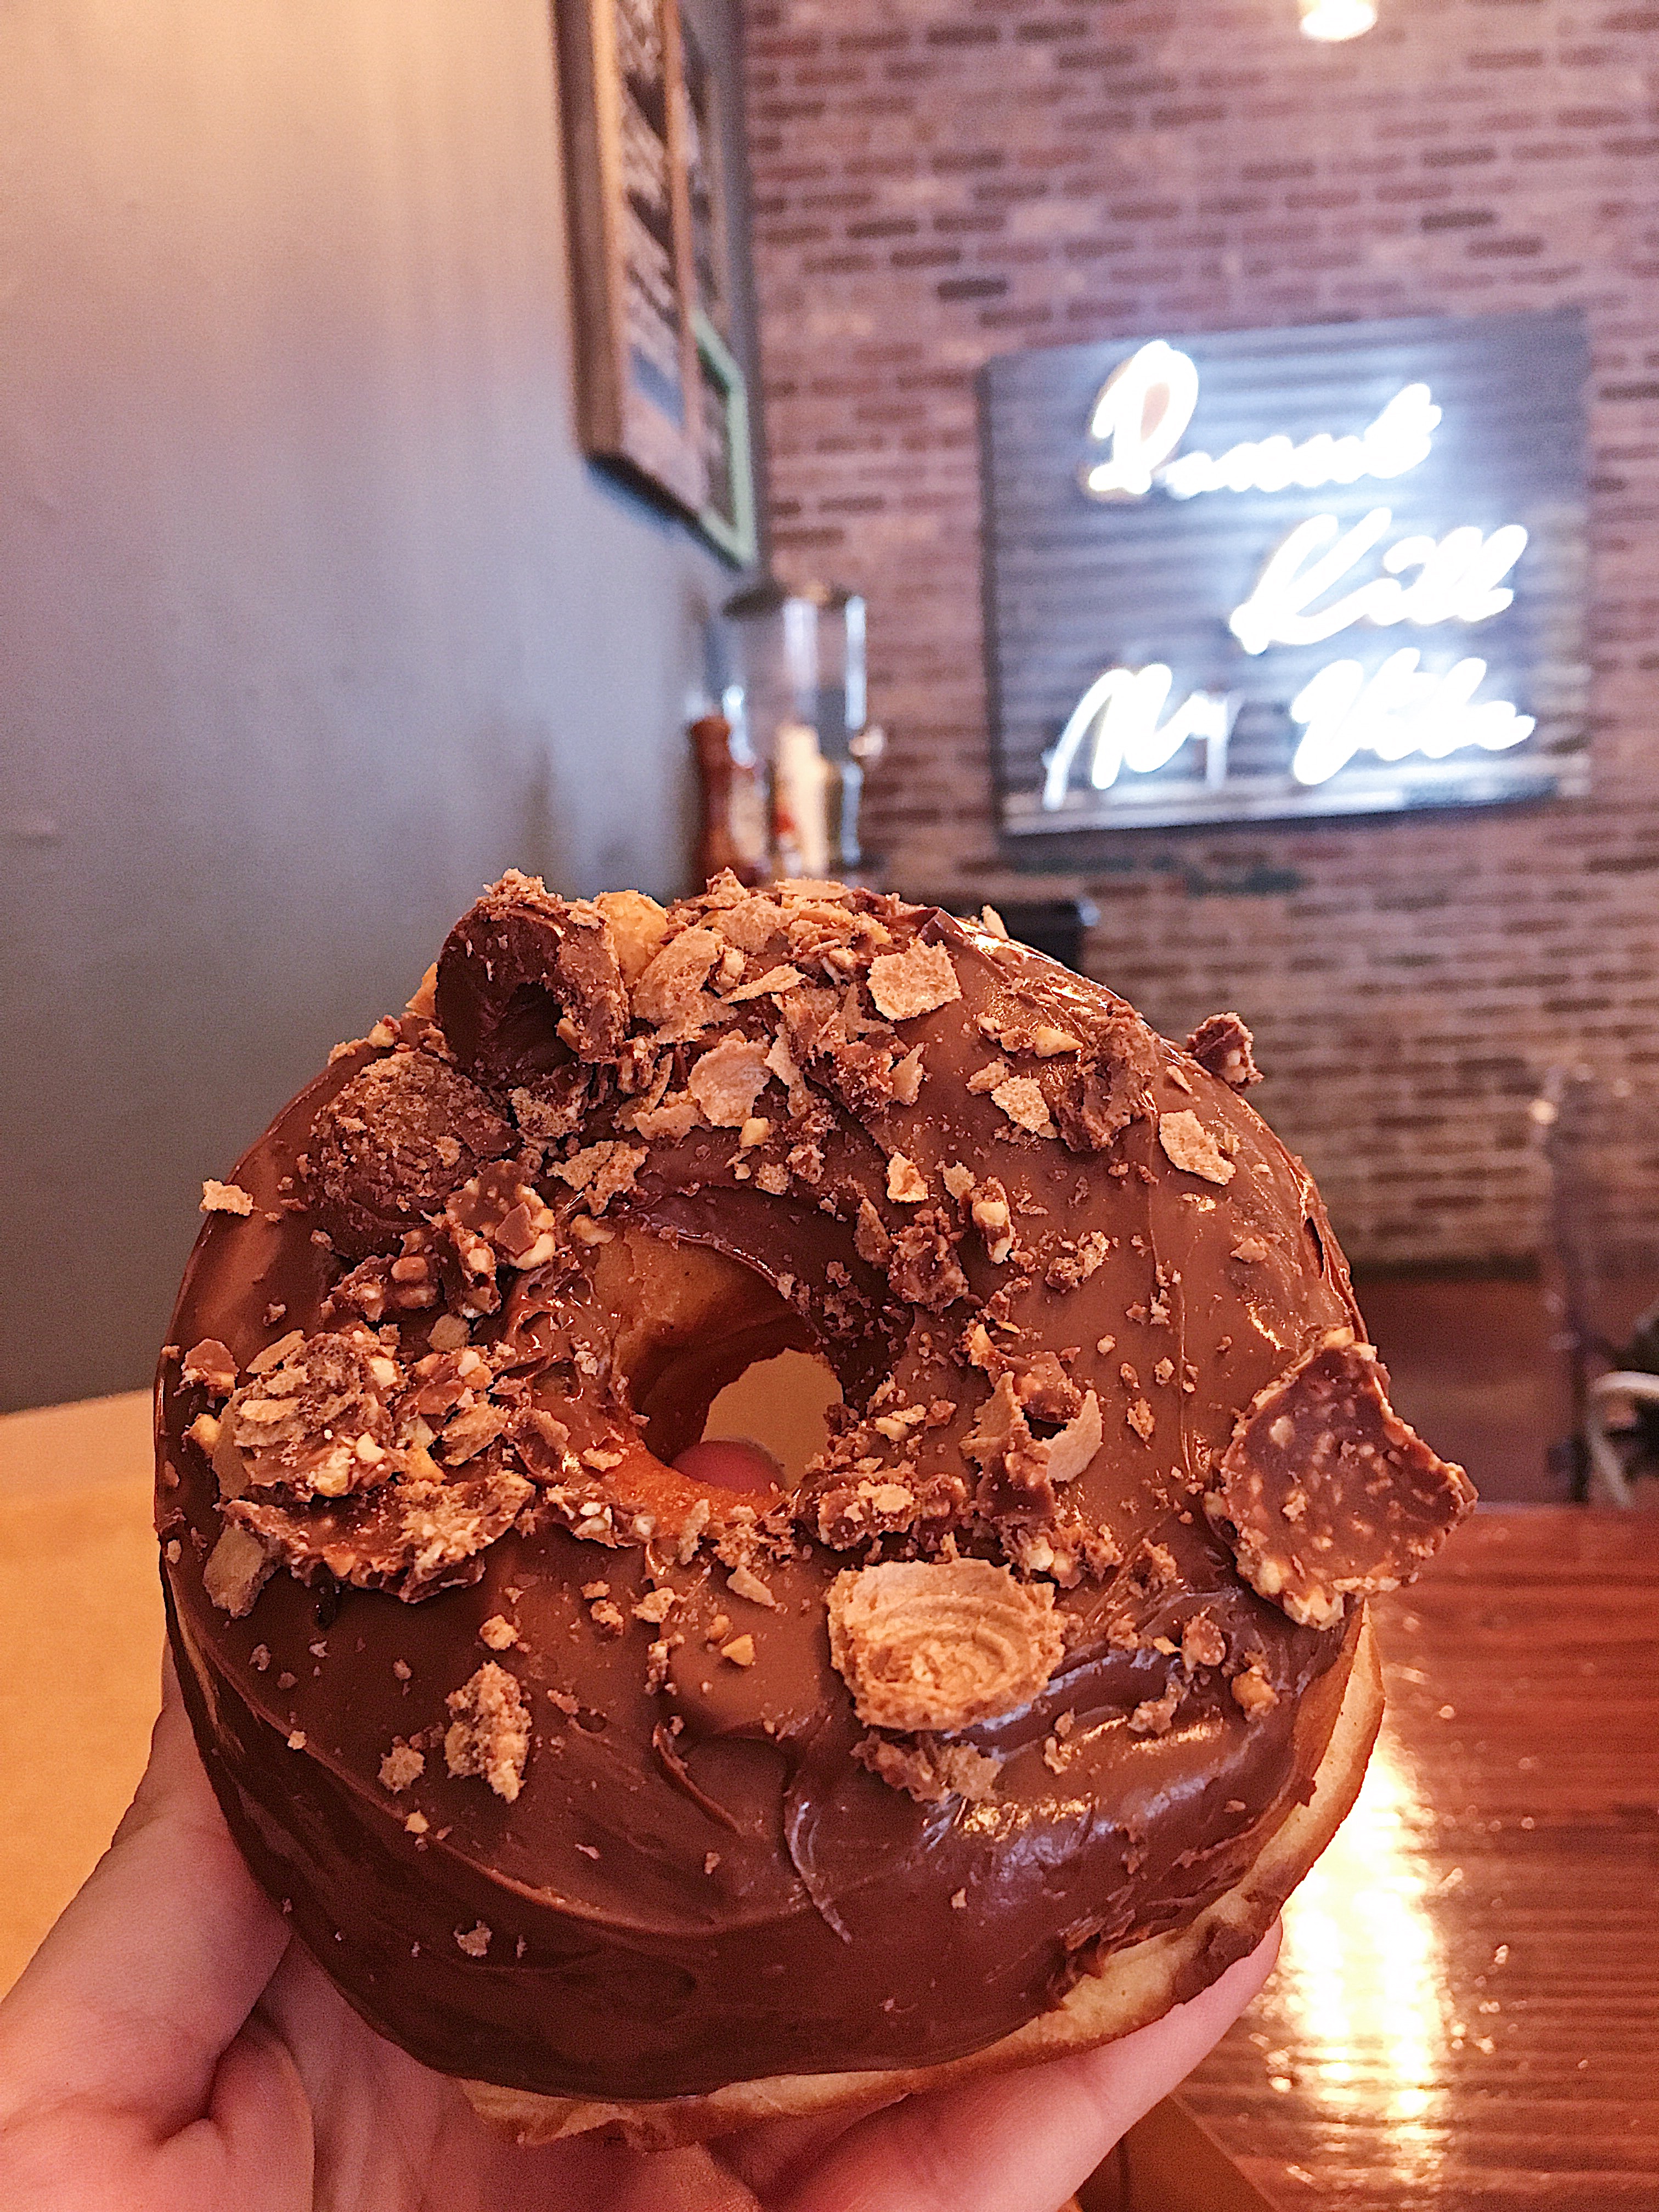 Chipmunk Donut at the Art of the Donut